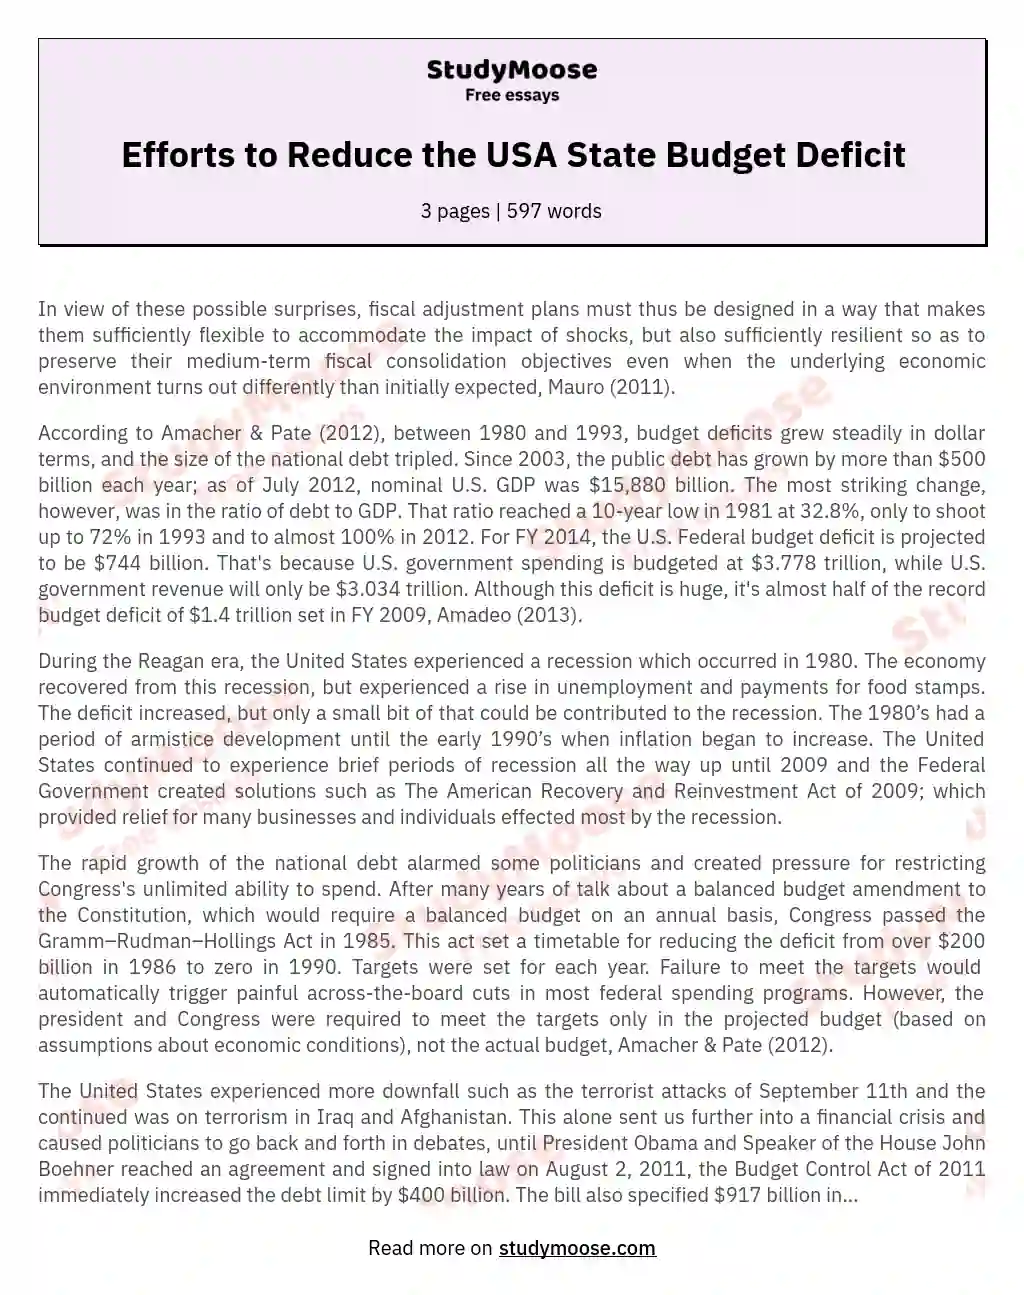 Efforts to Reduce the USA State Budget Deficit